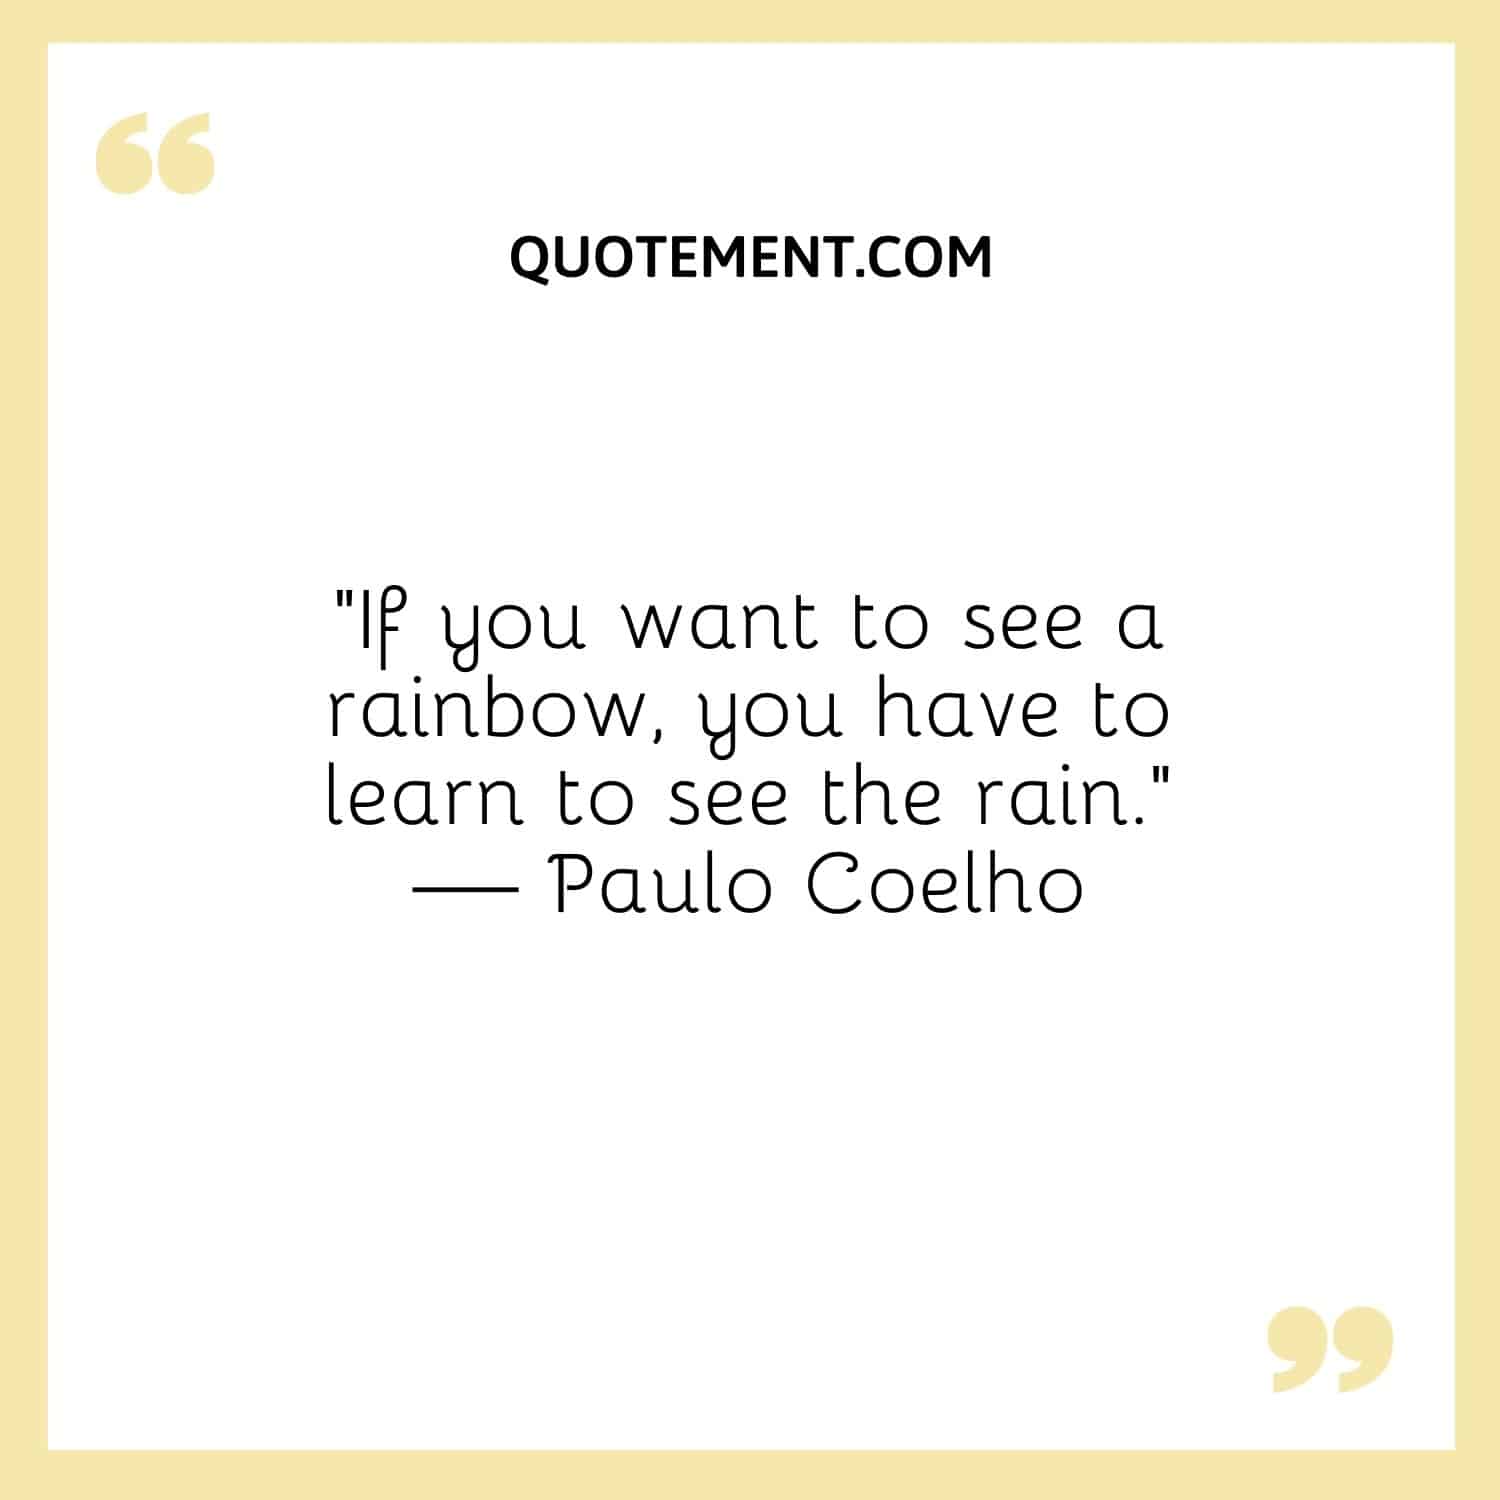 If you want to see a rainbow, you have to learn to see the rain